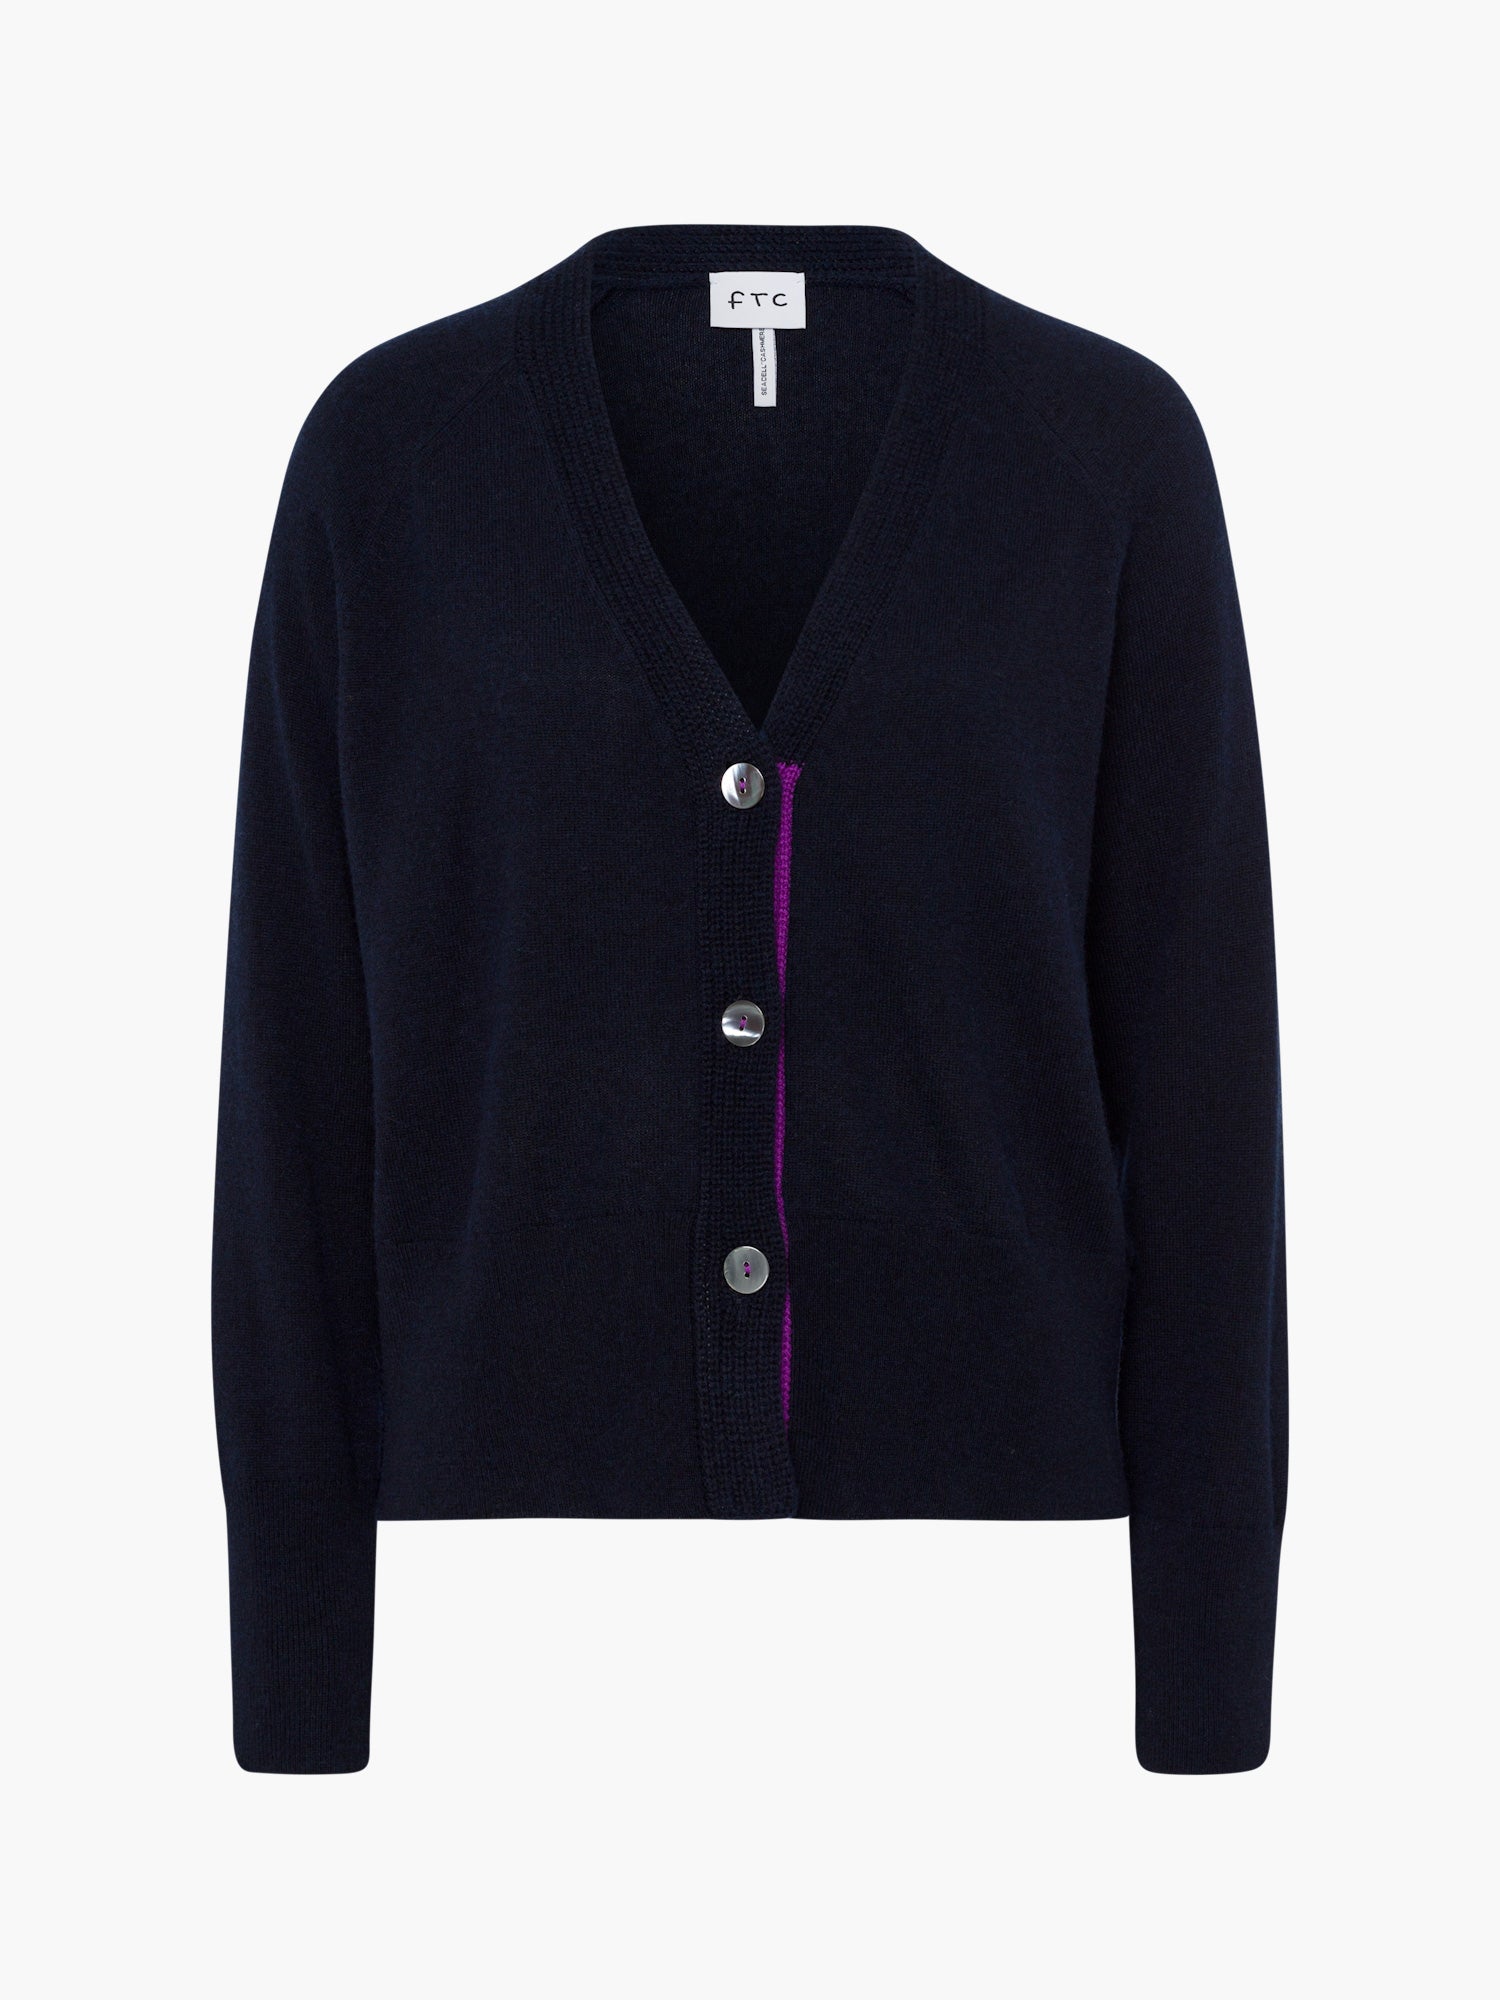 FTC-Cashmere-OUTLET-SALE-Cardigan-VN-Strick-ARCHIVE-COLLECTION_08fb1f61-e920-4e87-8f82-aec3b6cc3eae.jpg